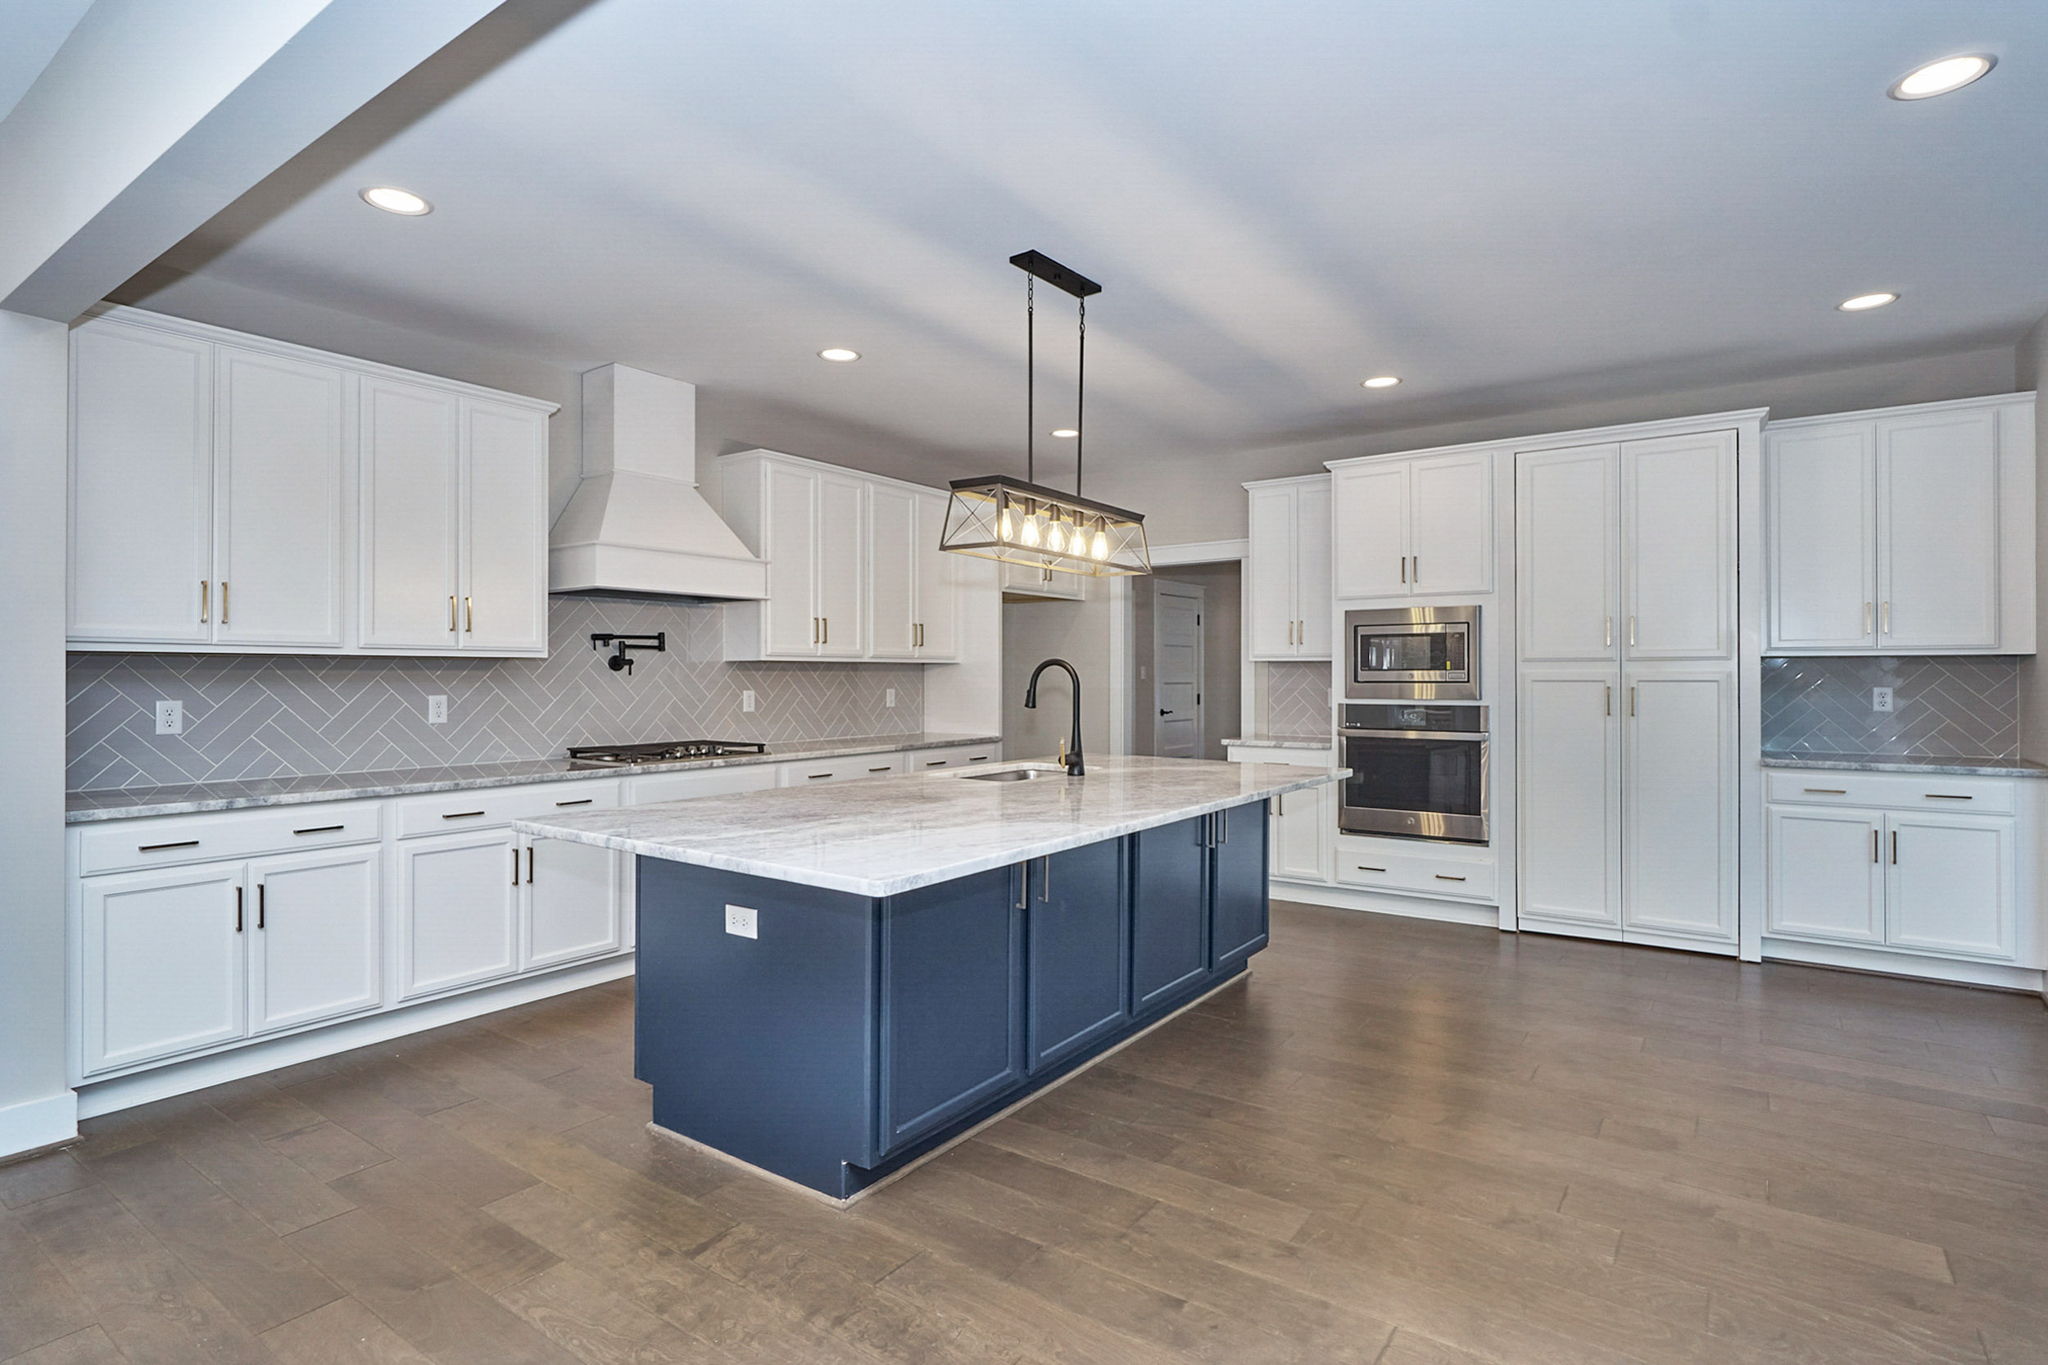 Modern kitchen with white cabinets, blue island, stainless steel appliances, and pendant lighting.